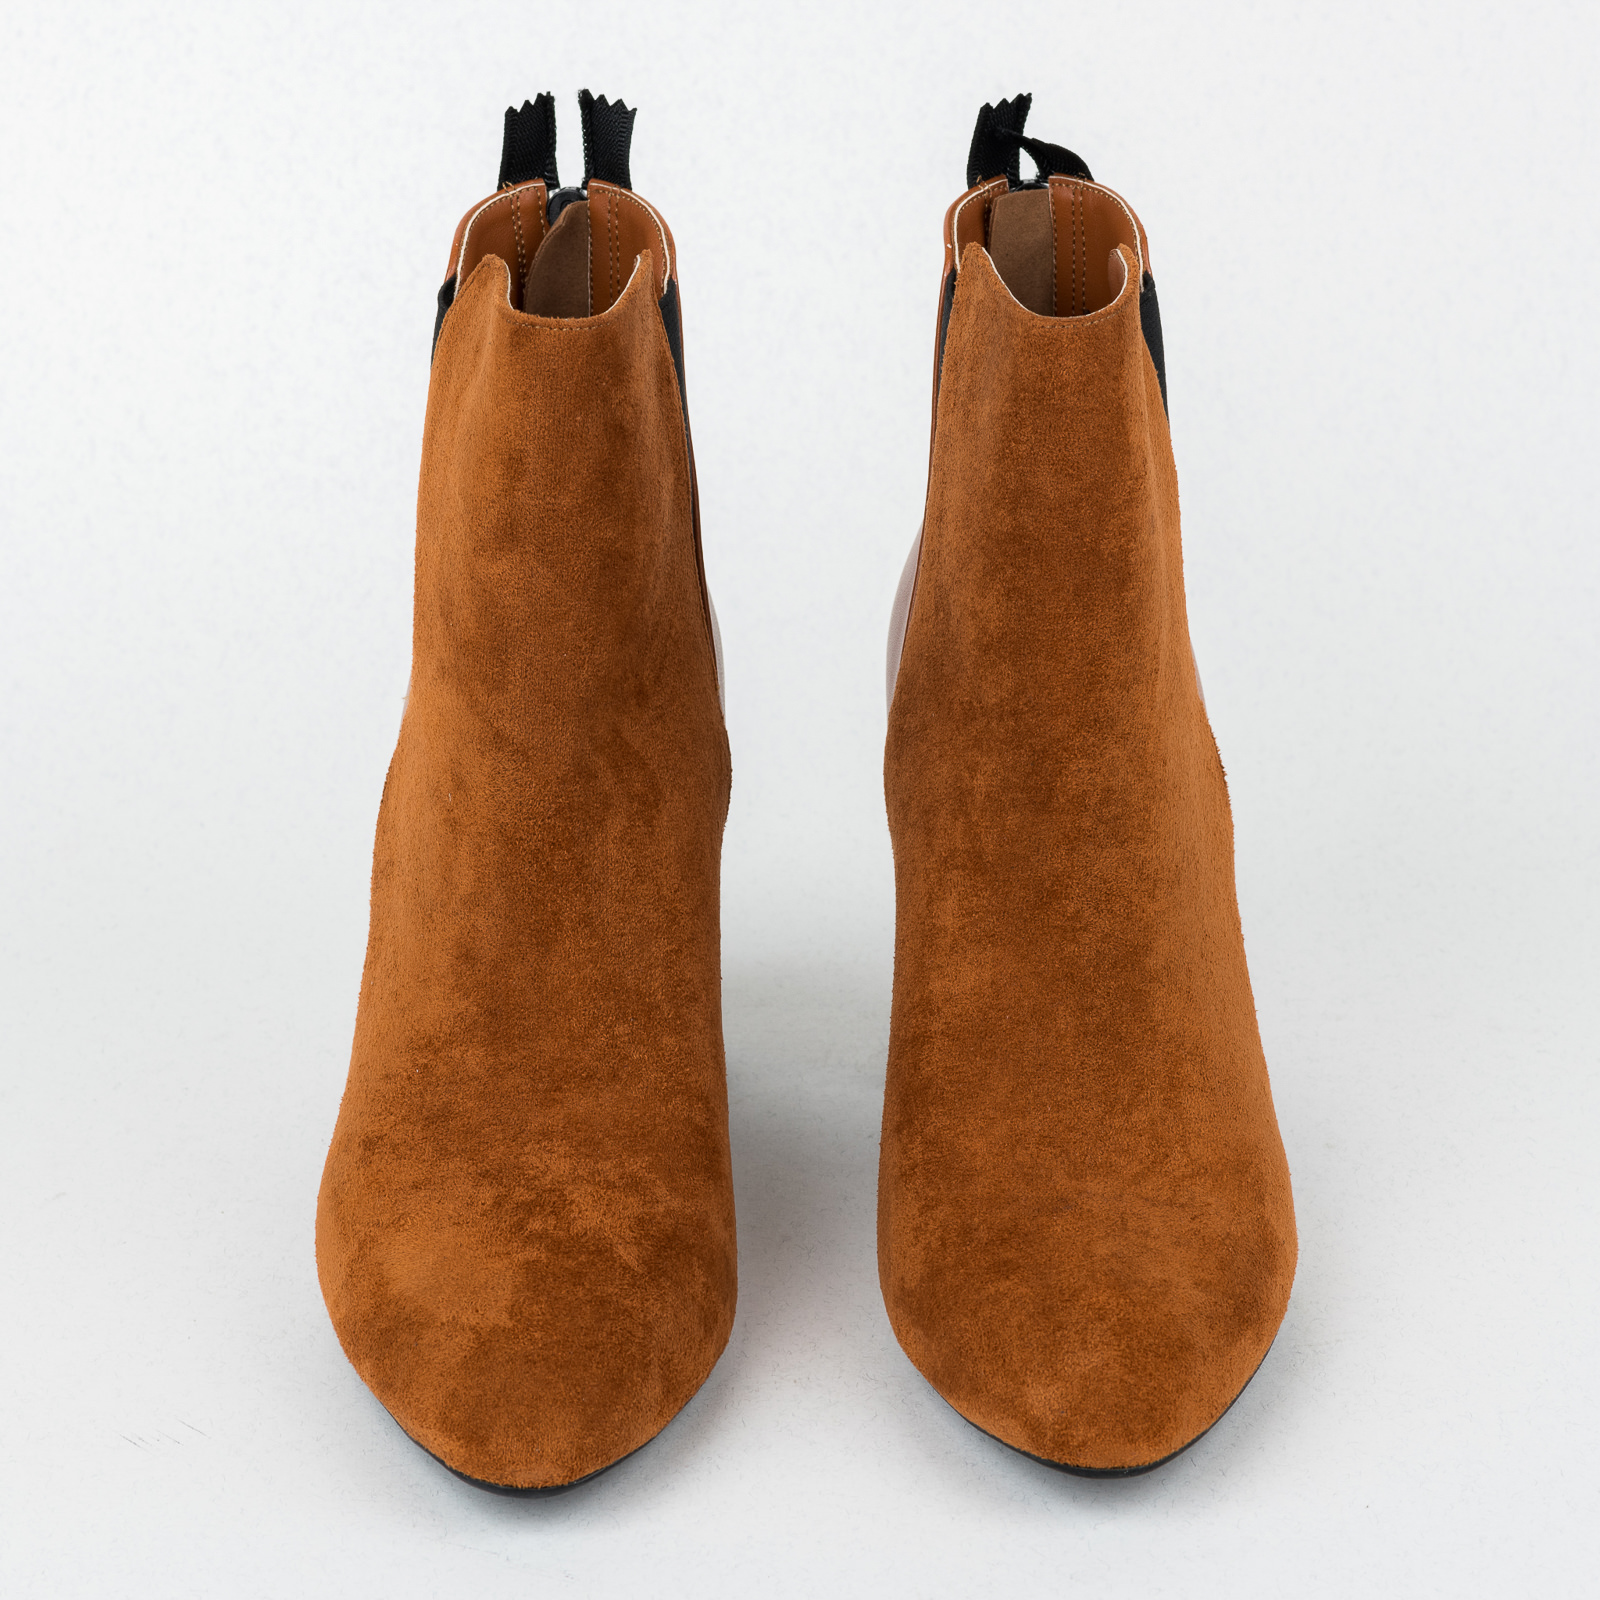 Women ankle boots B502 - CAMEL